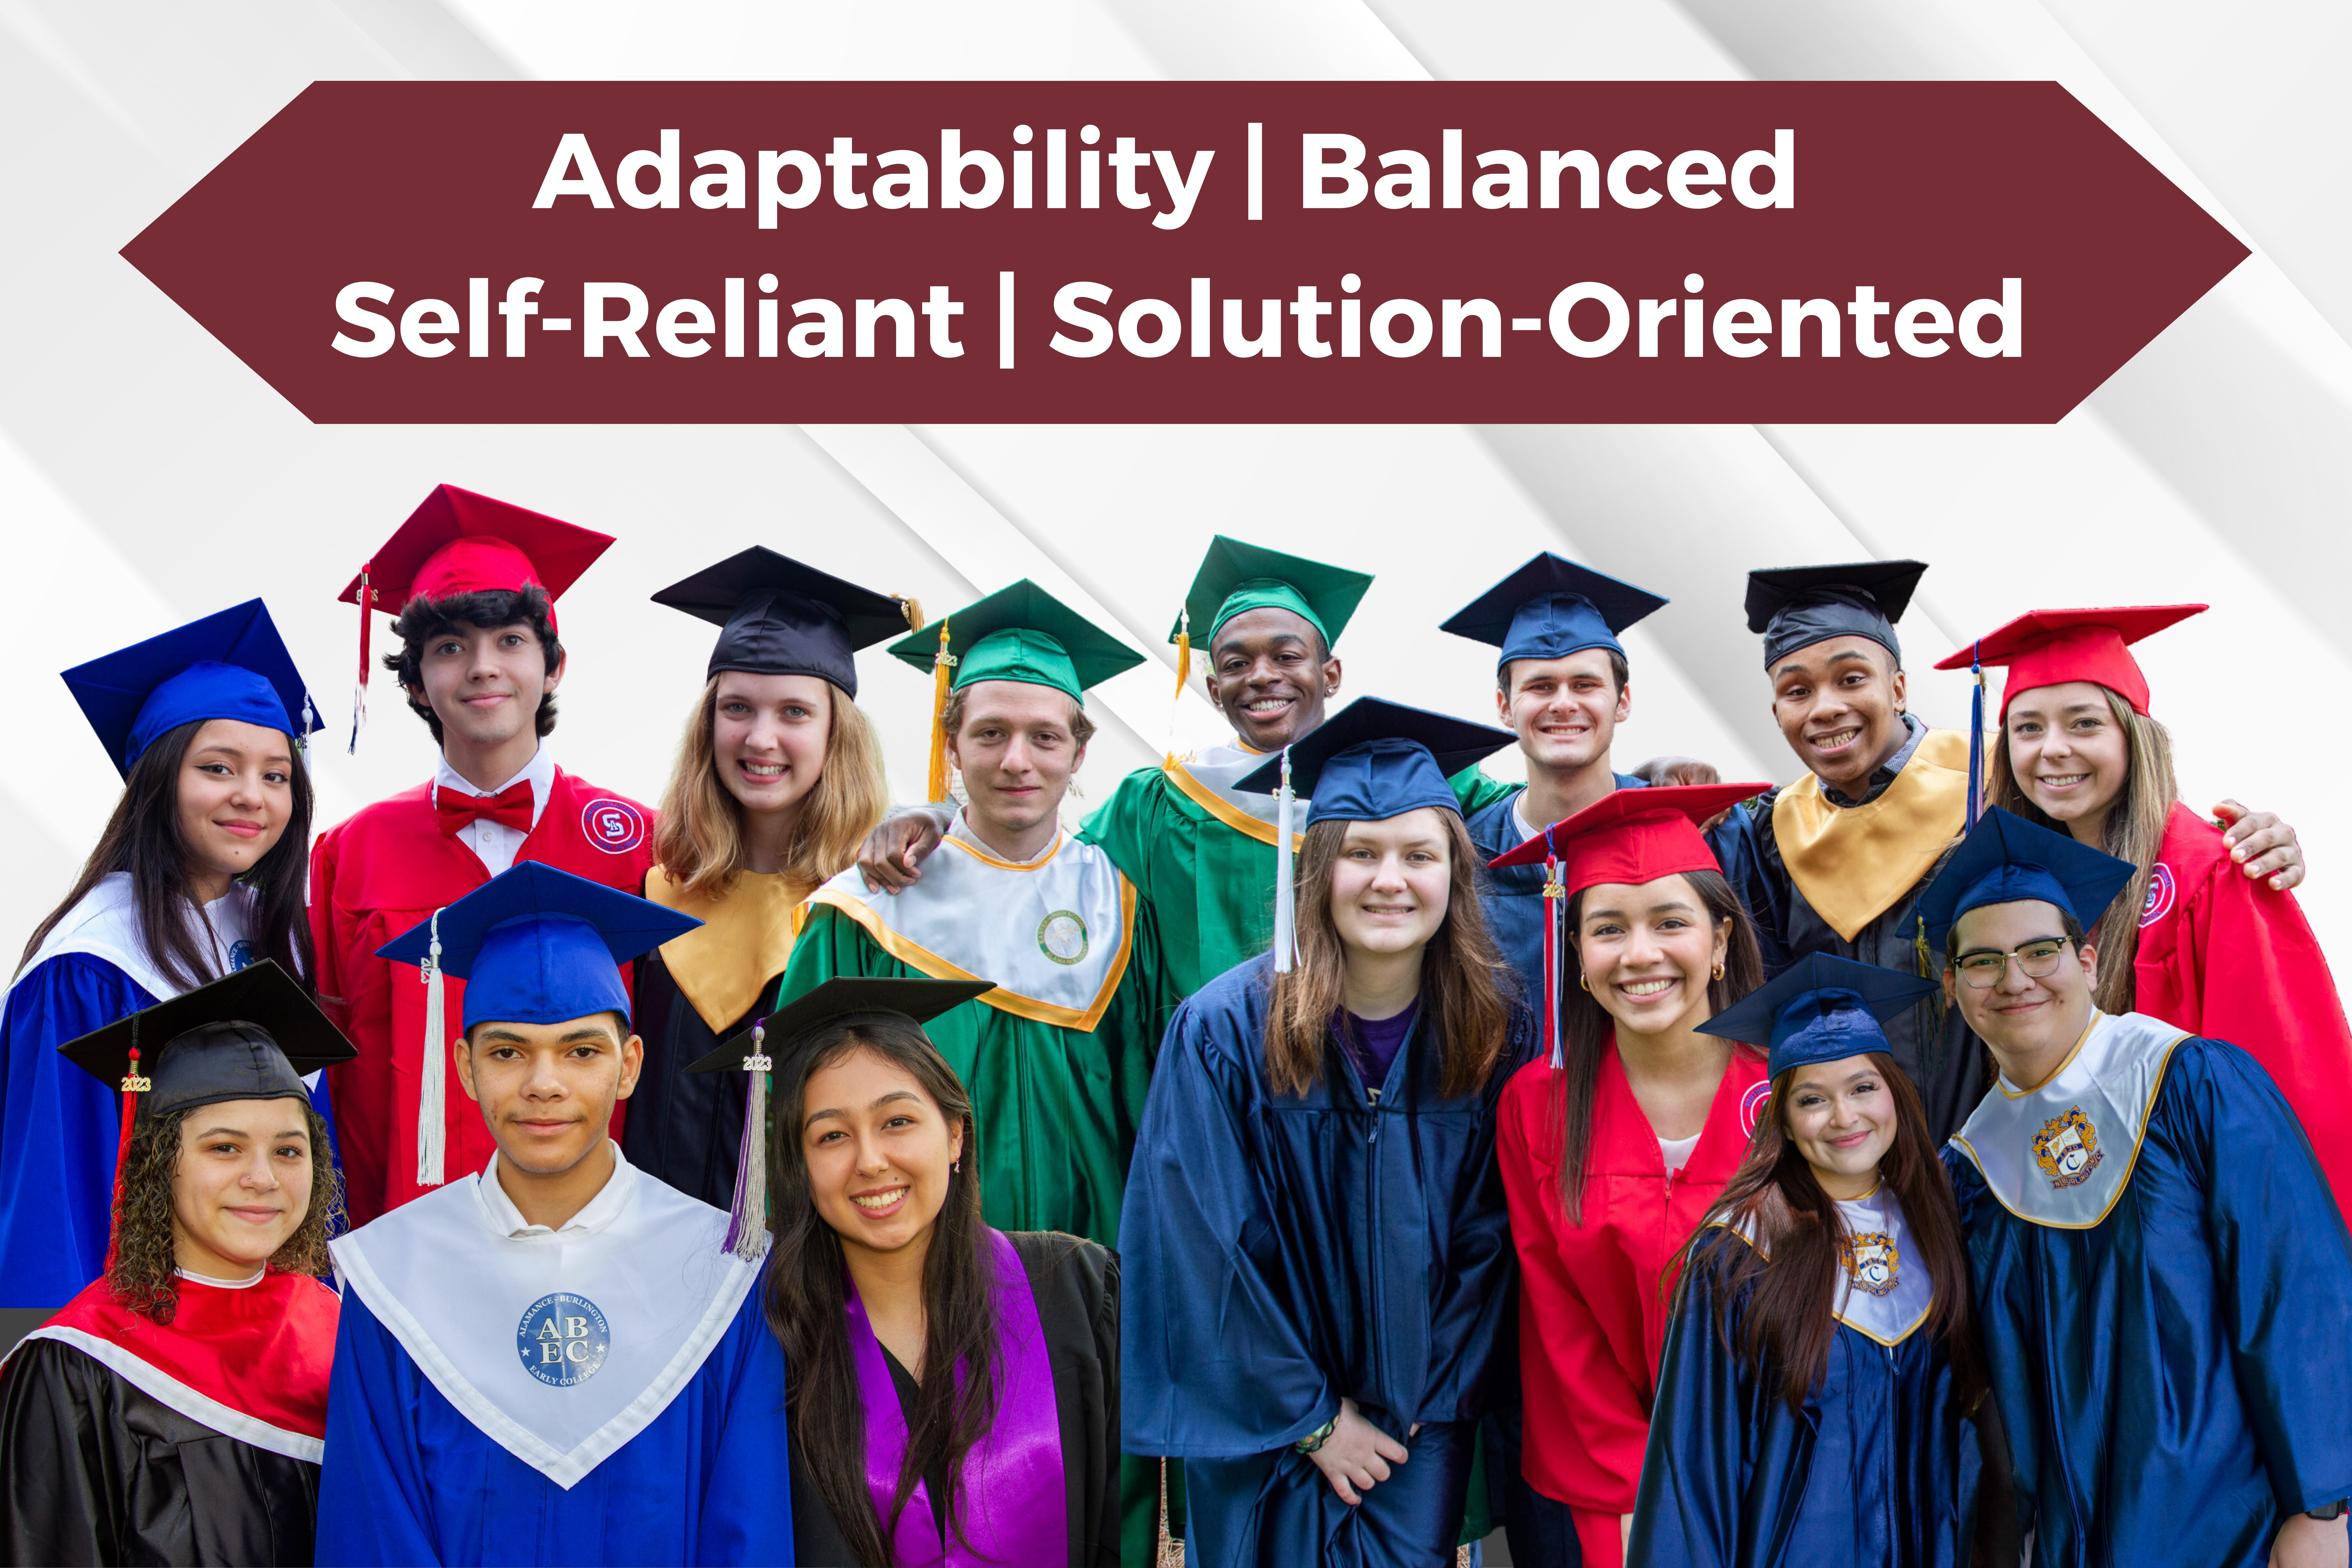 photo of graduates in cap & gown with text overlay Adaptability, Balanced, Self-Reliant, Solution Oriented 